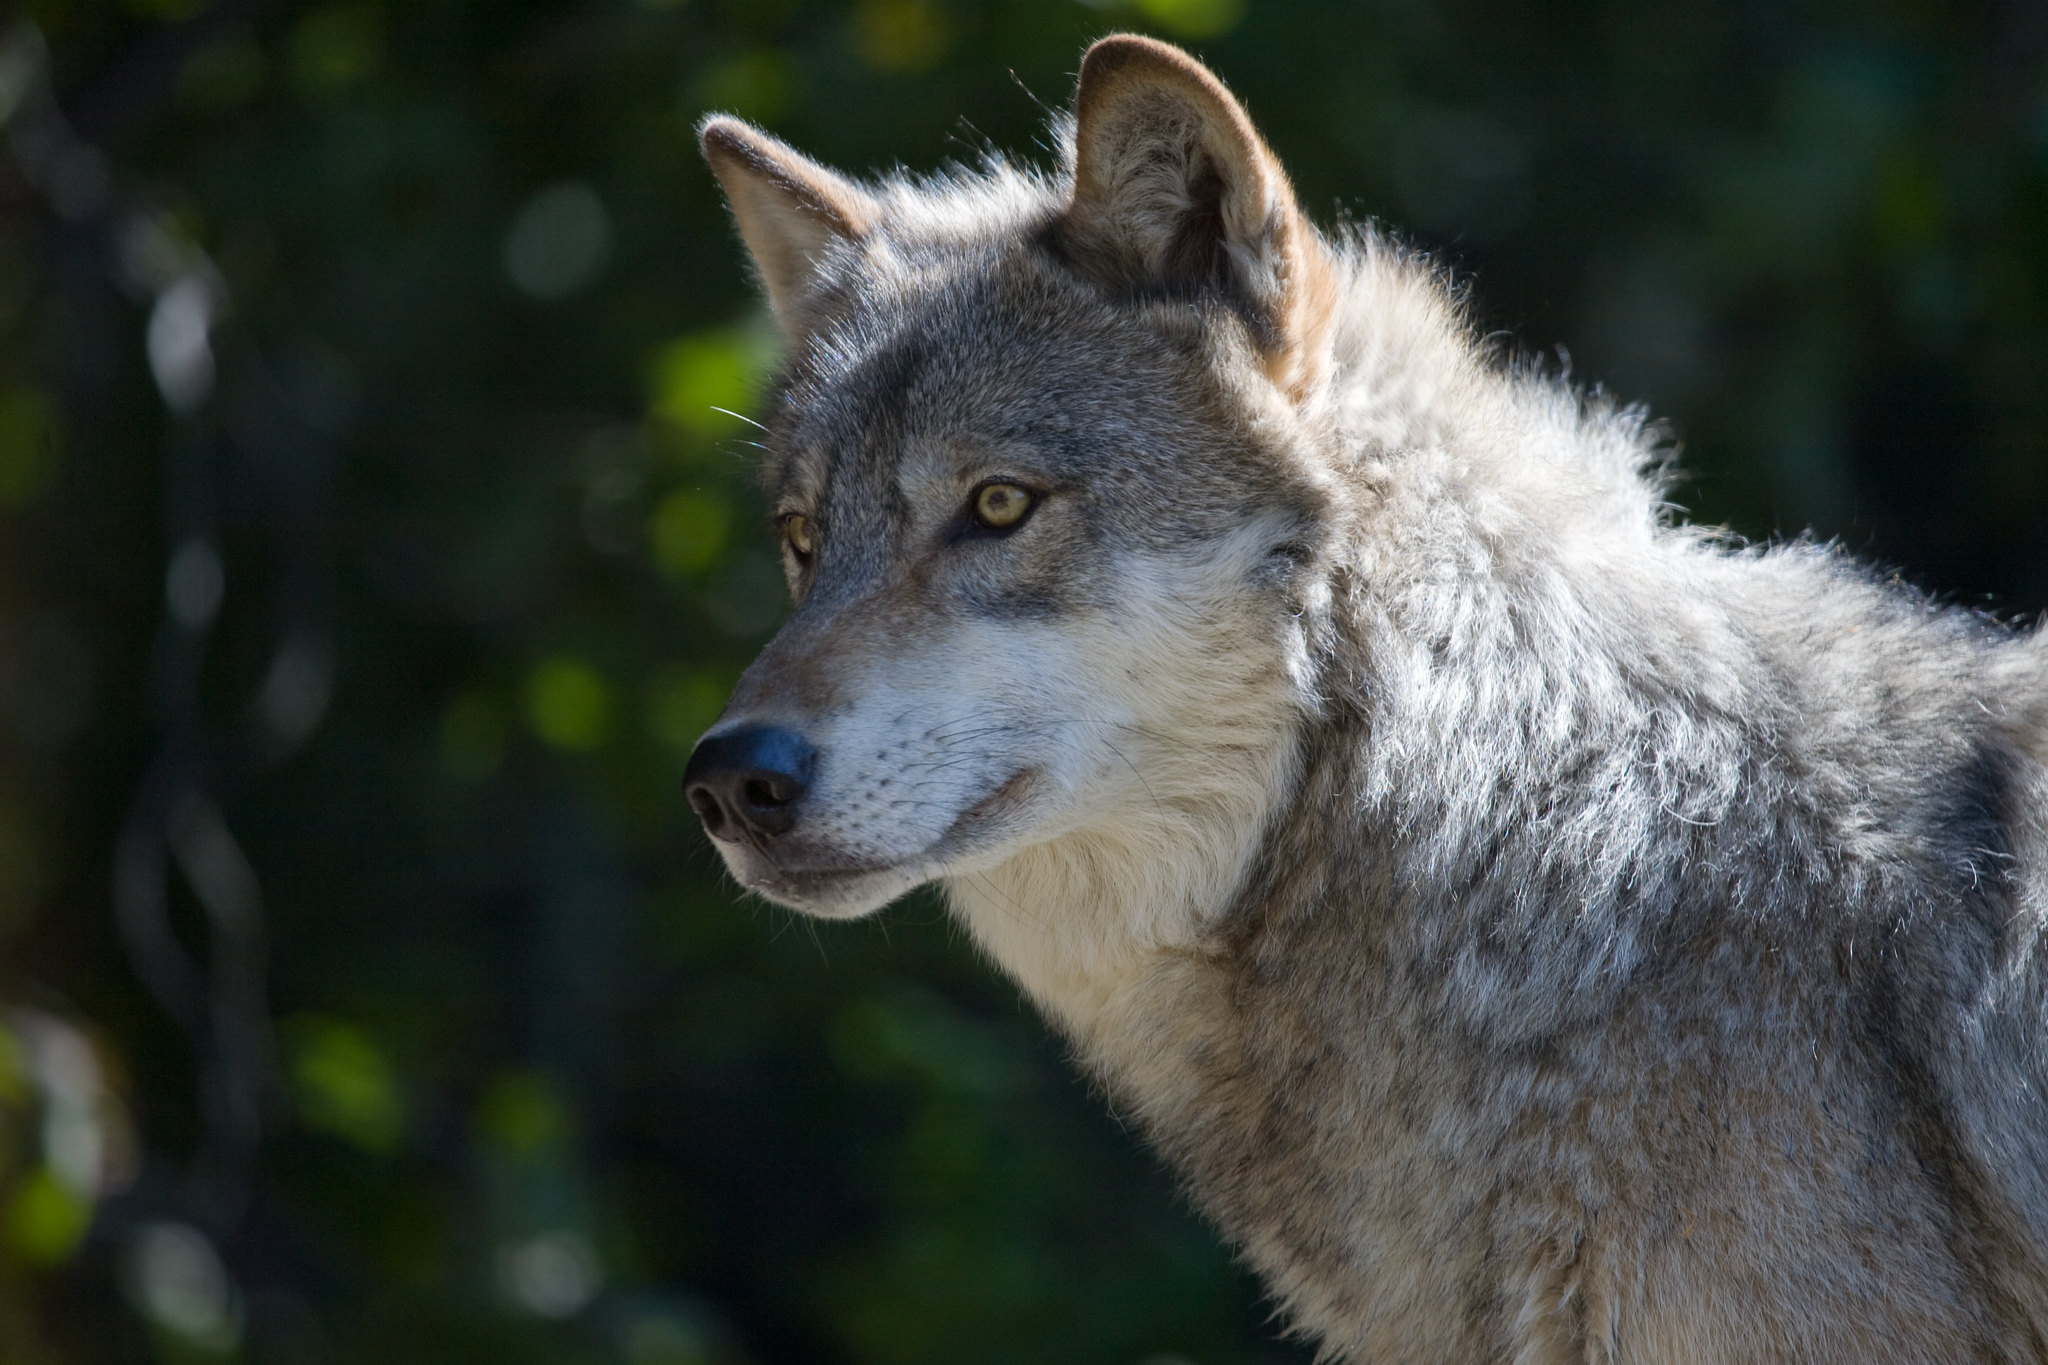 Tribal, hunting and wildlife groups at odds over proposed changes to wolf harvest regulations